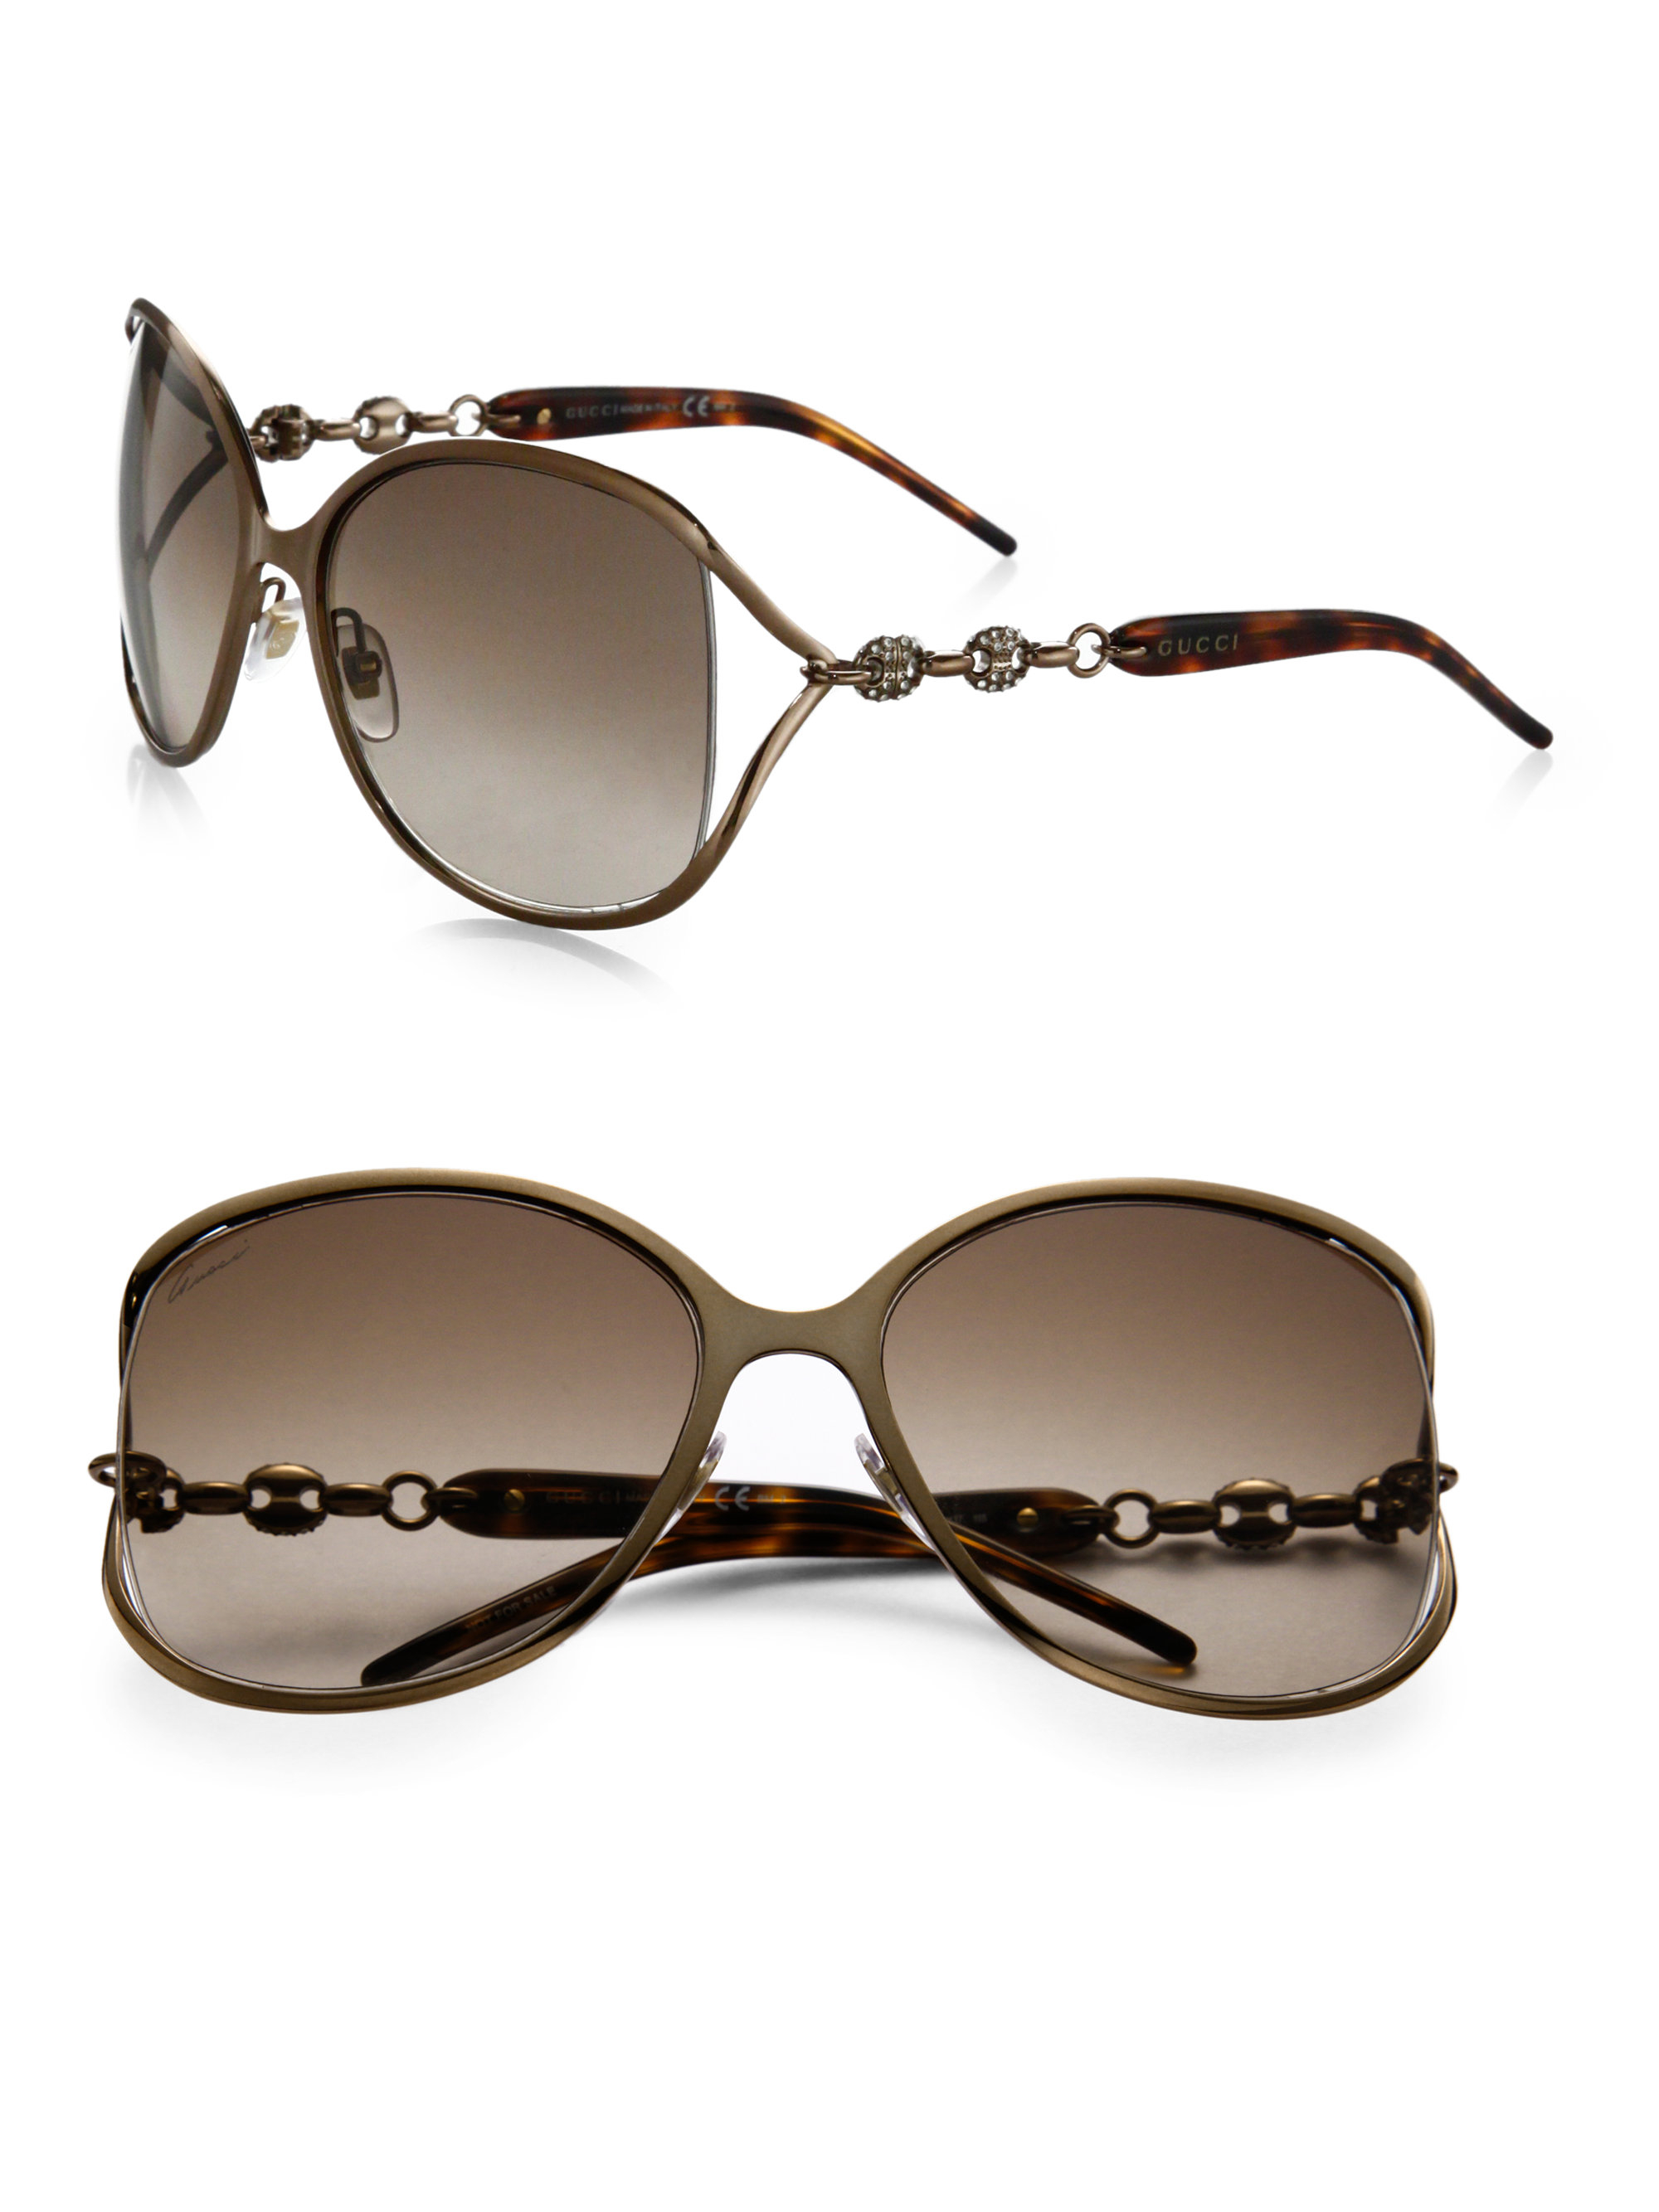 house of fraser gucci sunglasses, OFF 